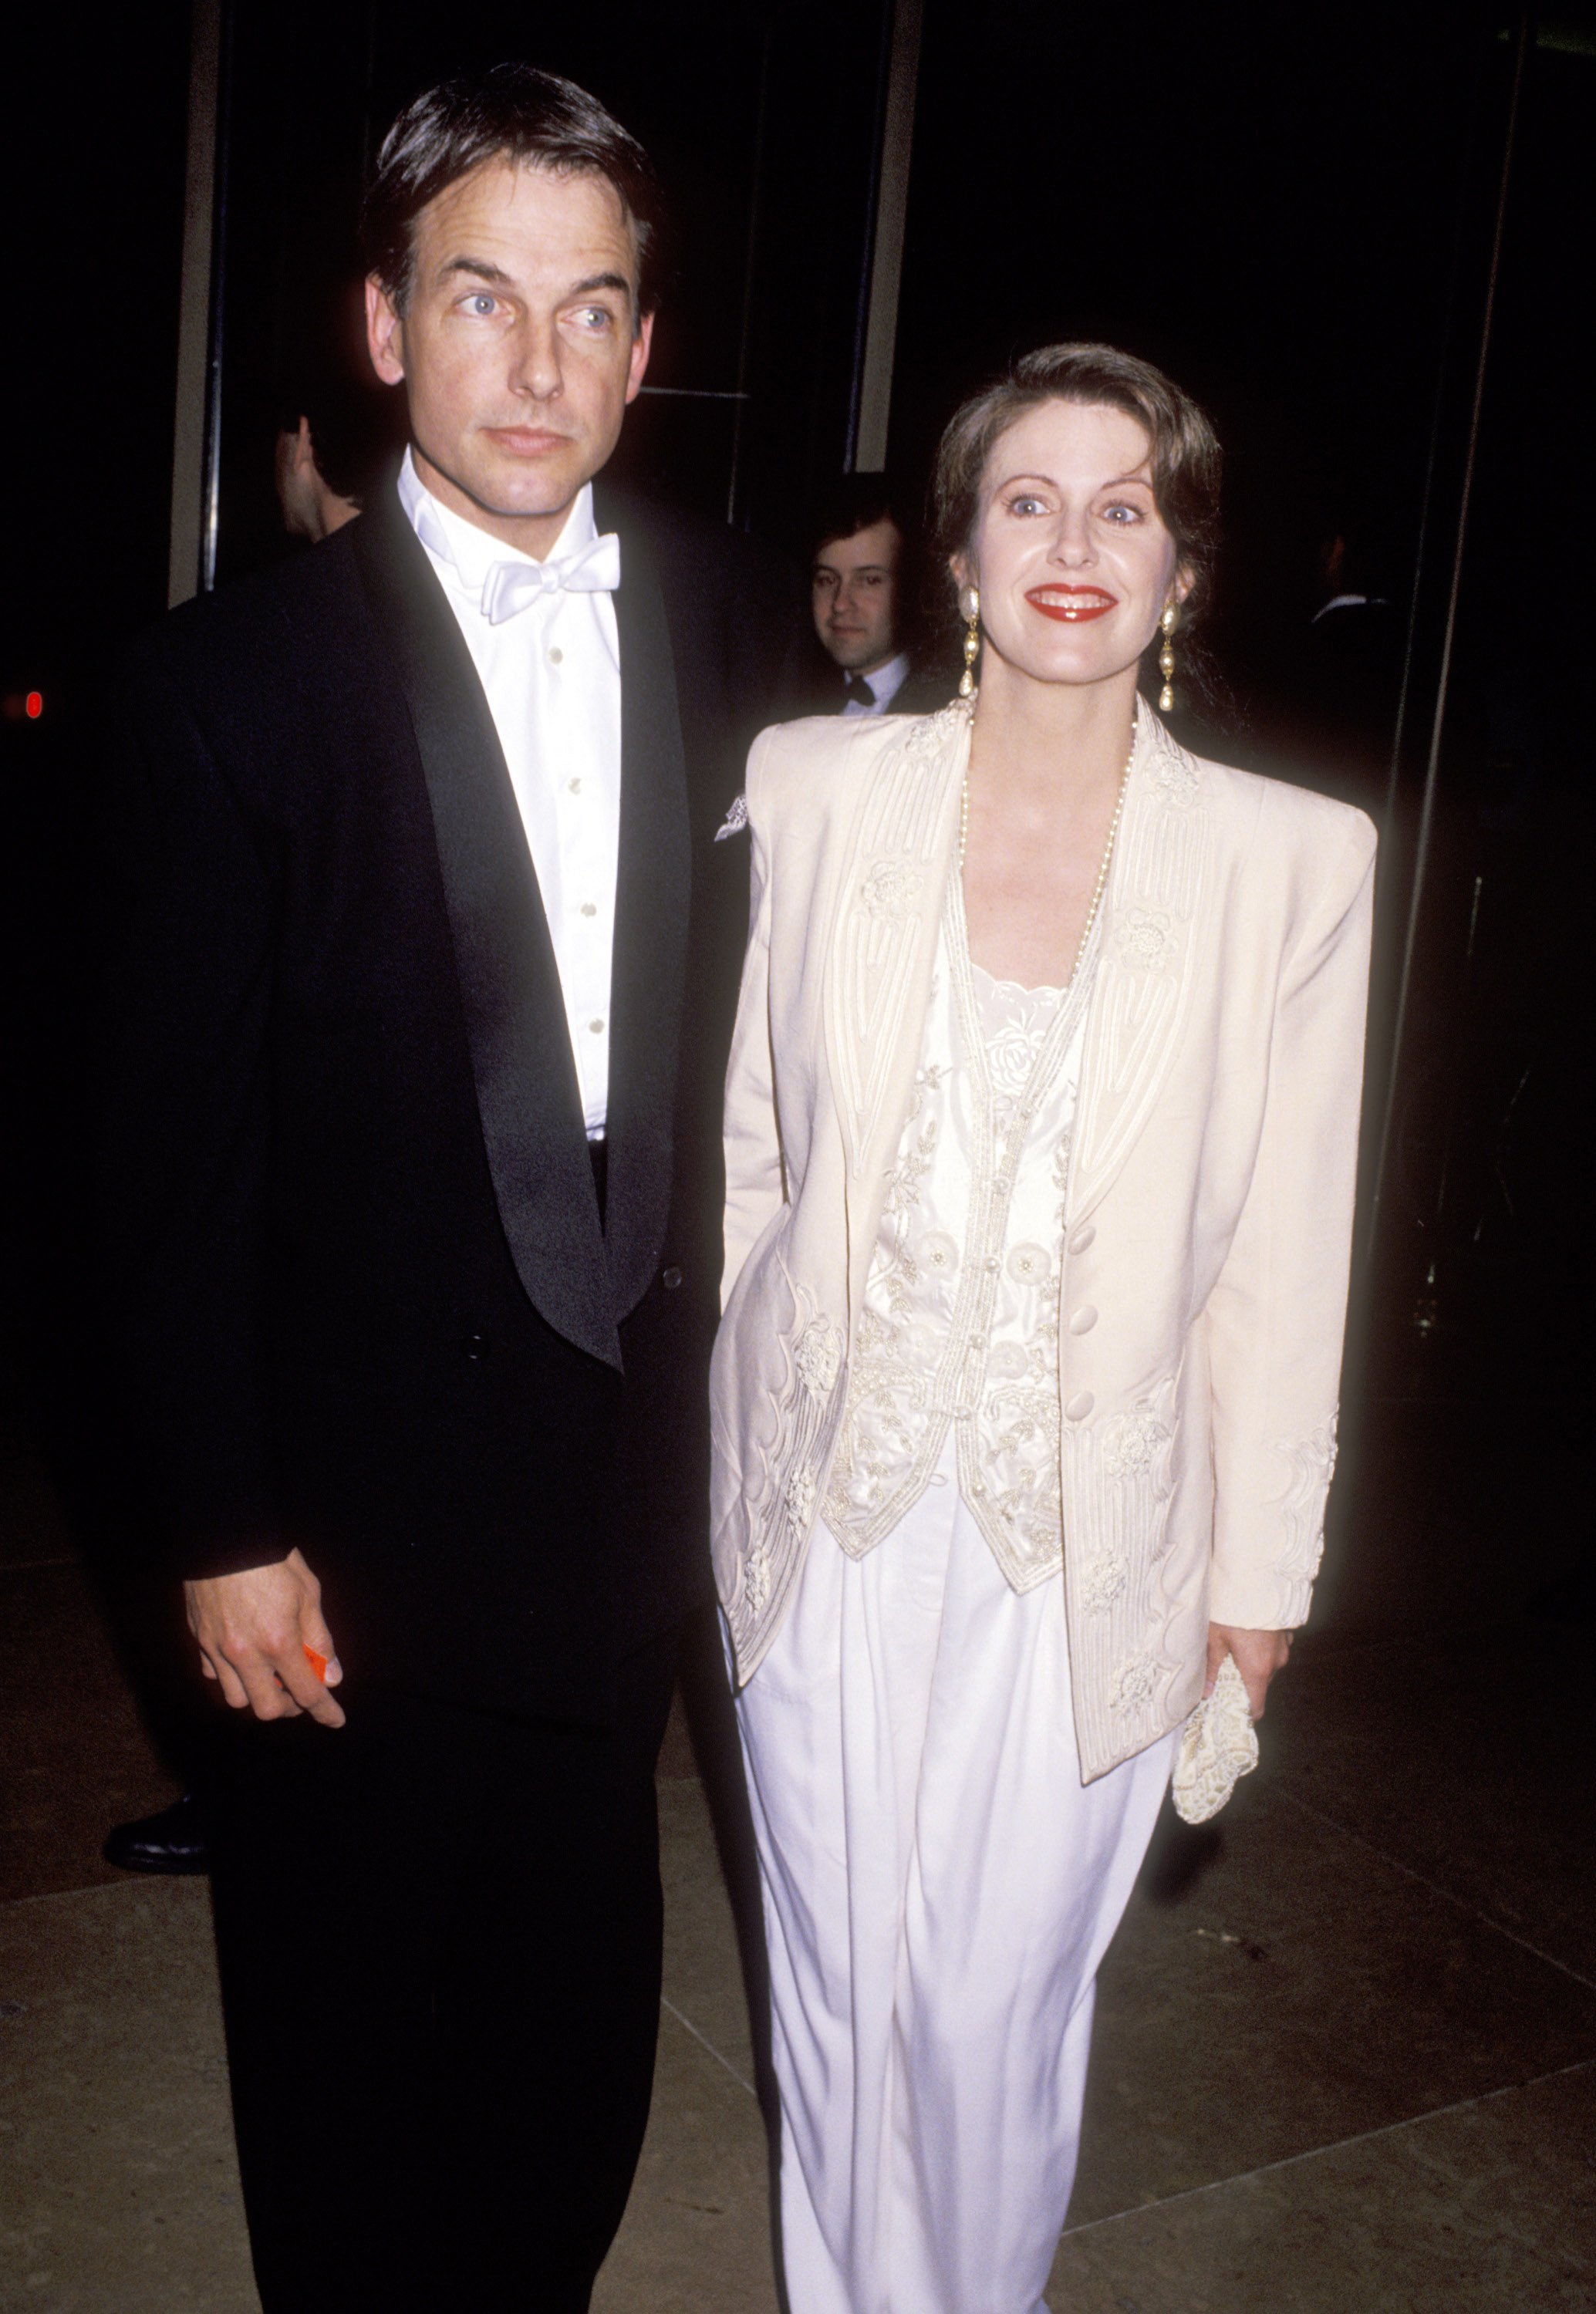 Mark Harmon and Pam Dawber. | Source: Getty Images